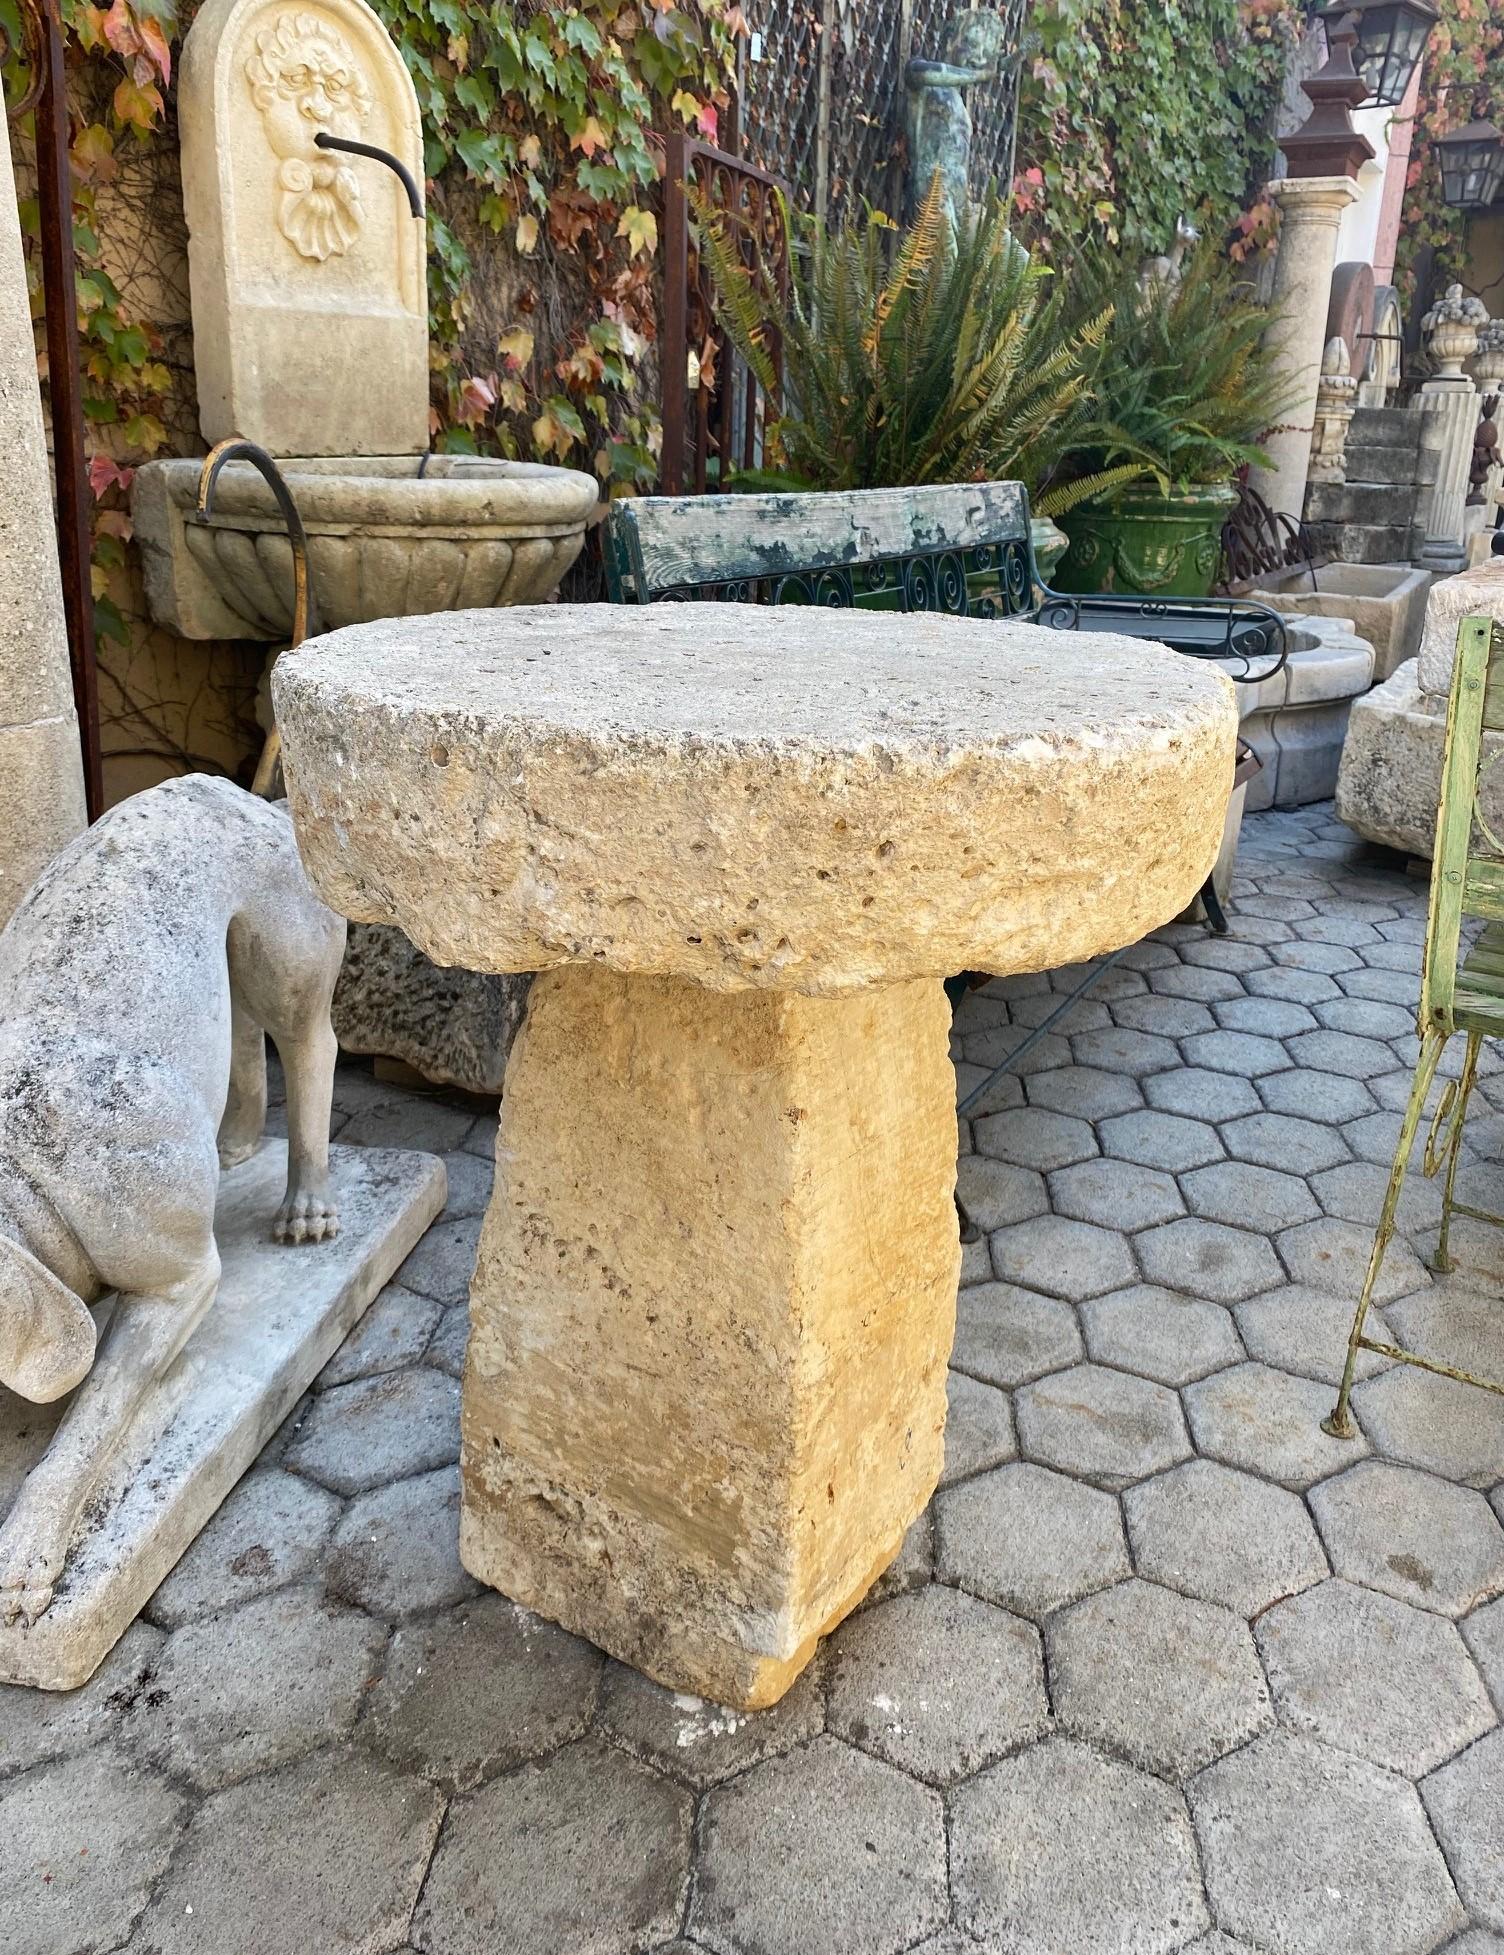 17th 18th Century elements hand carved small stone round antique garden patio coffee outdoor indoor table for two. It will be the perfect touch by an outdoor fireplace or on the patio next to your bedroom to have the morning coffee and welcome a